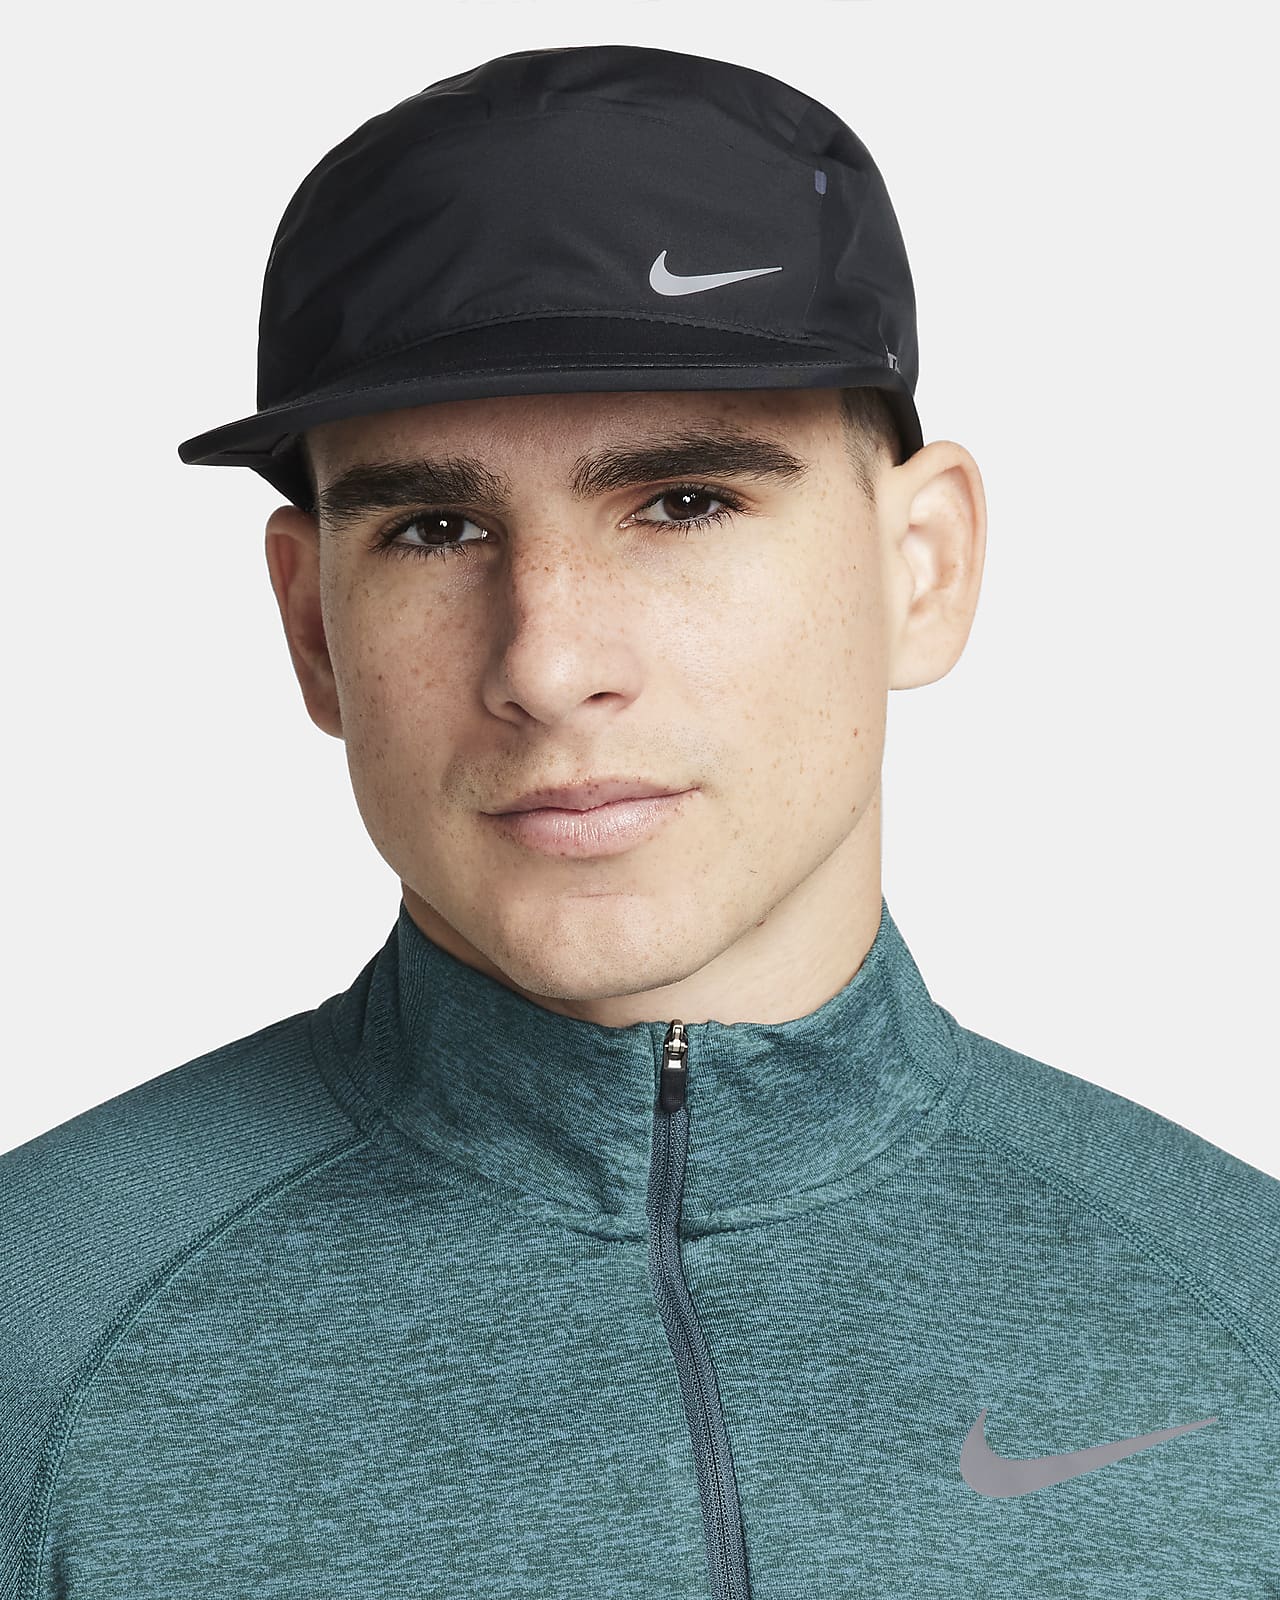 Nike Storm-FIT ADV Unstructured Cap. Fly AeroBill